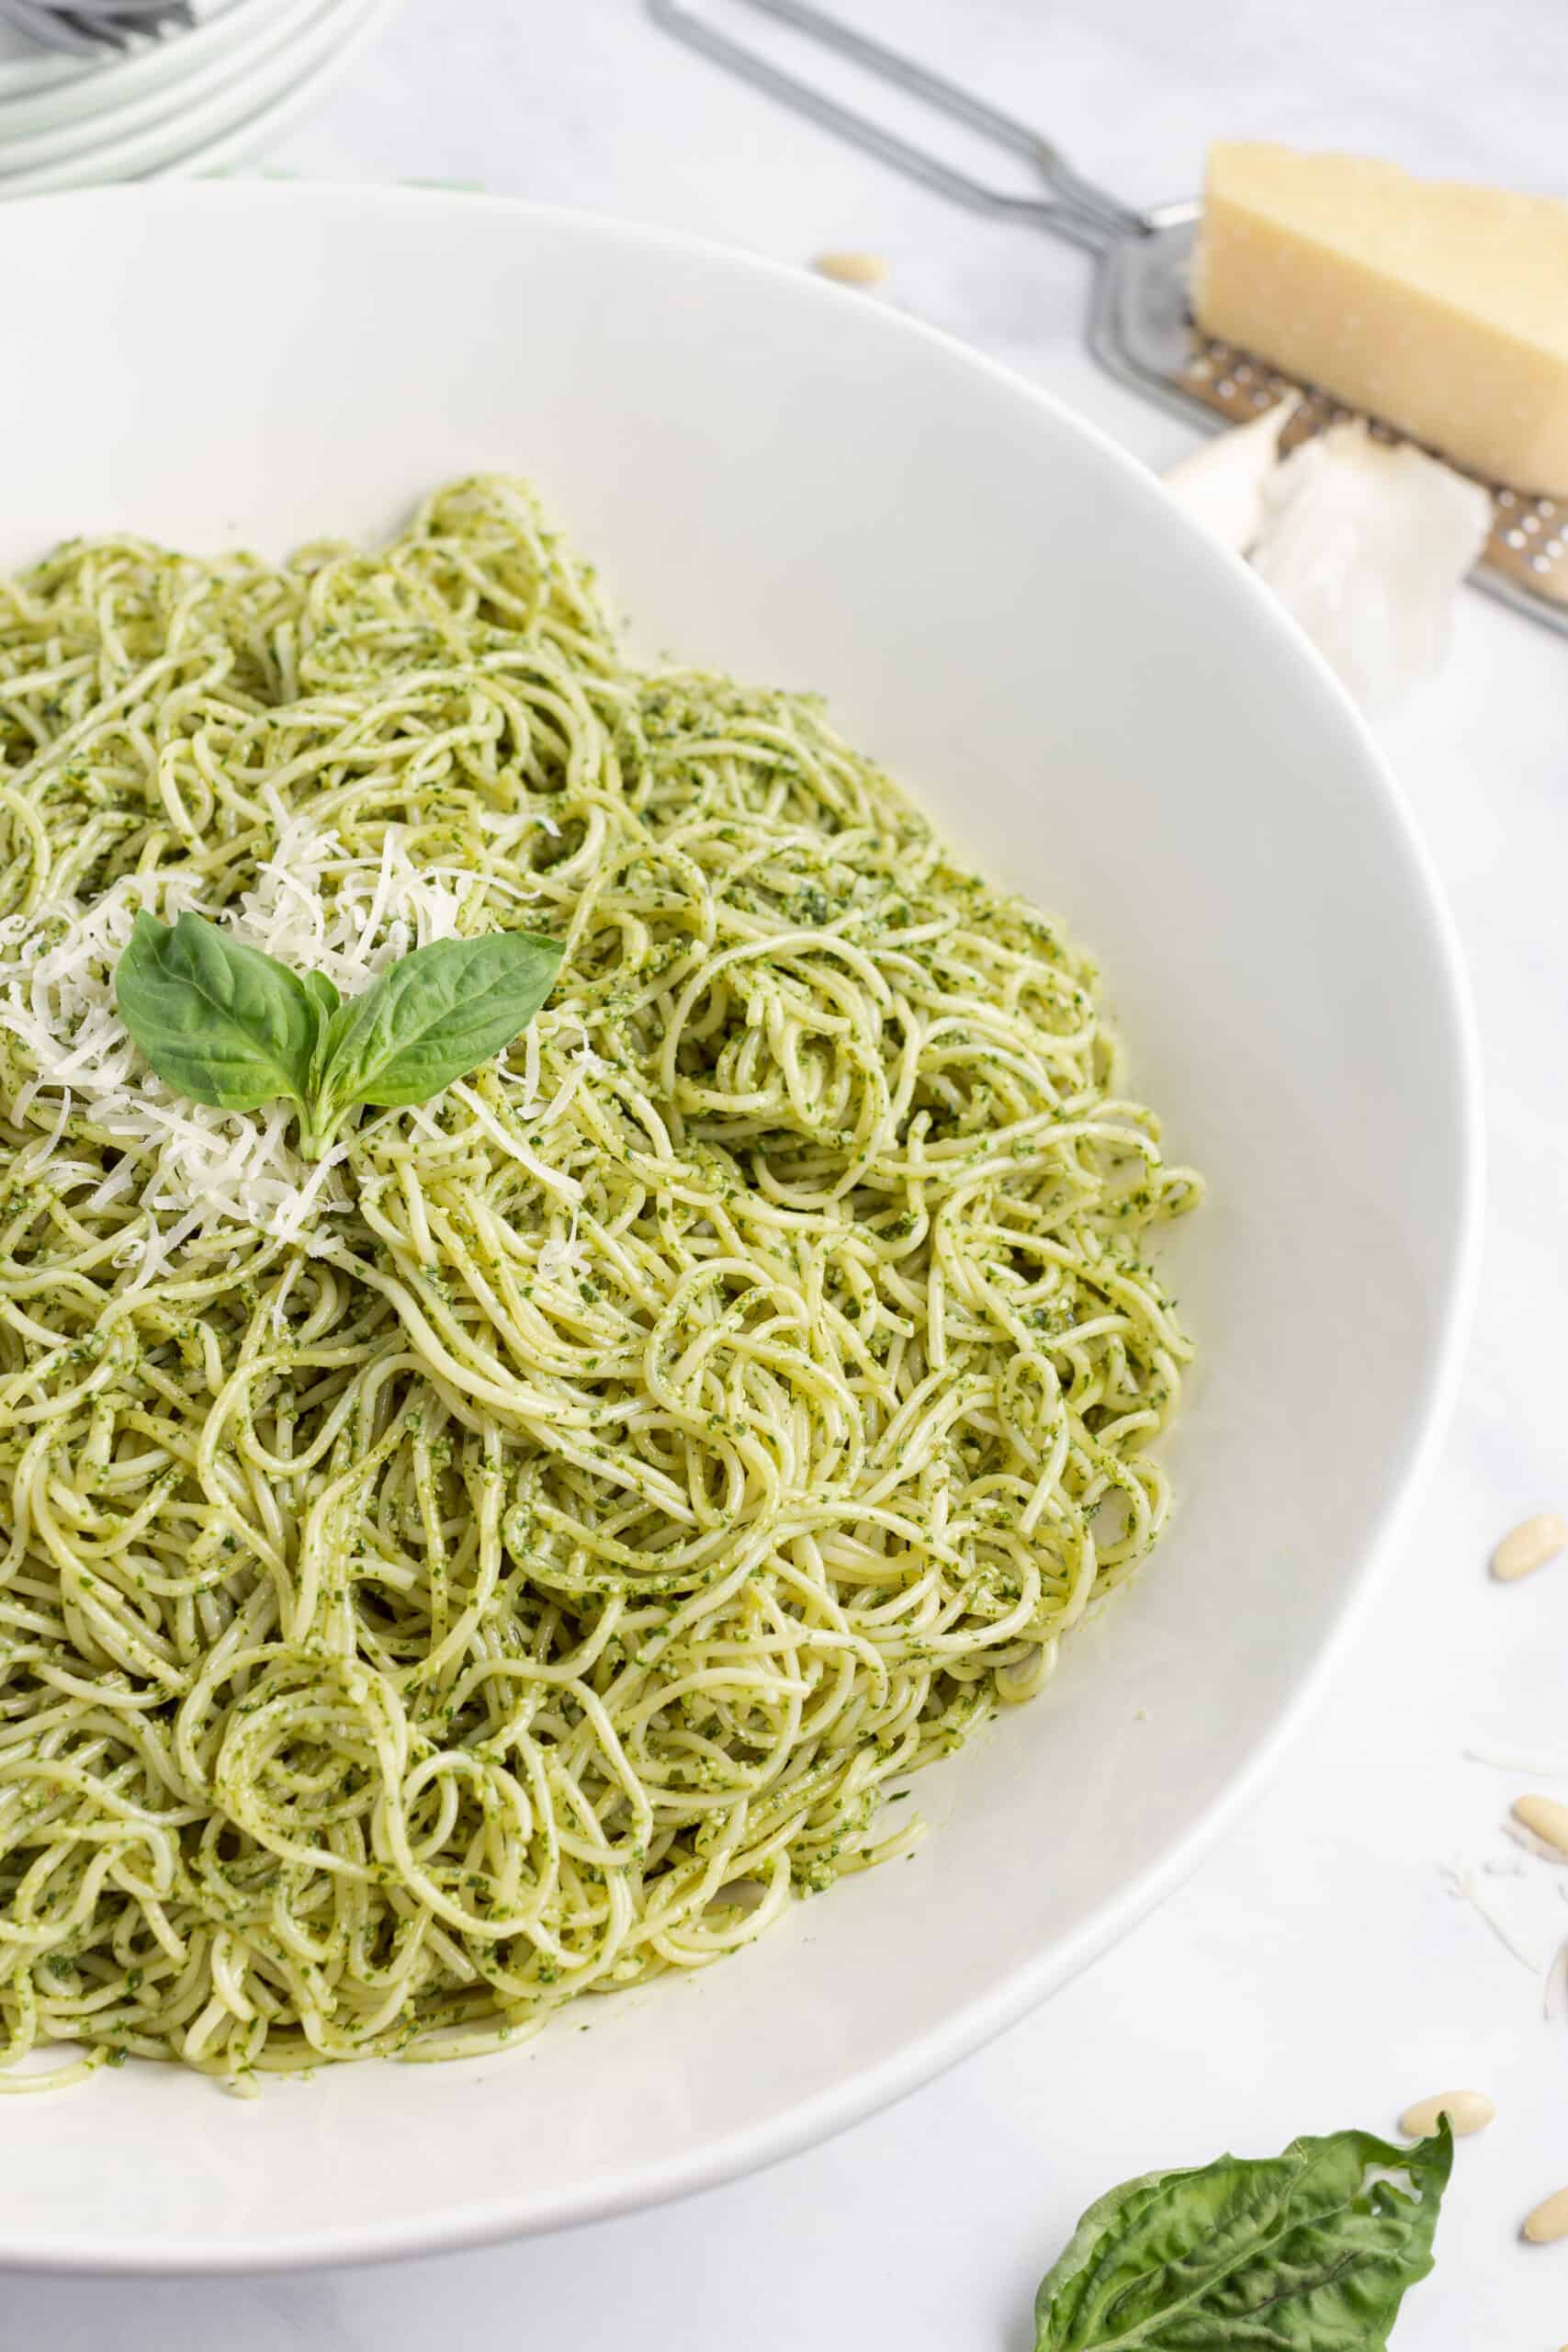 Spaghetti noodles with homemade pesto and parmesan cheese in a white serving bowl.